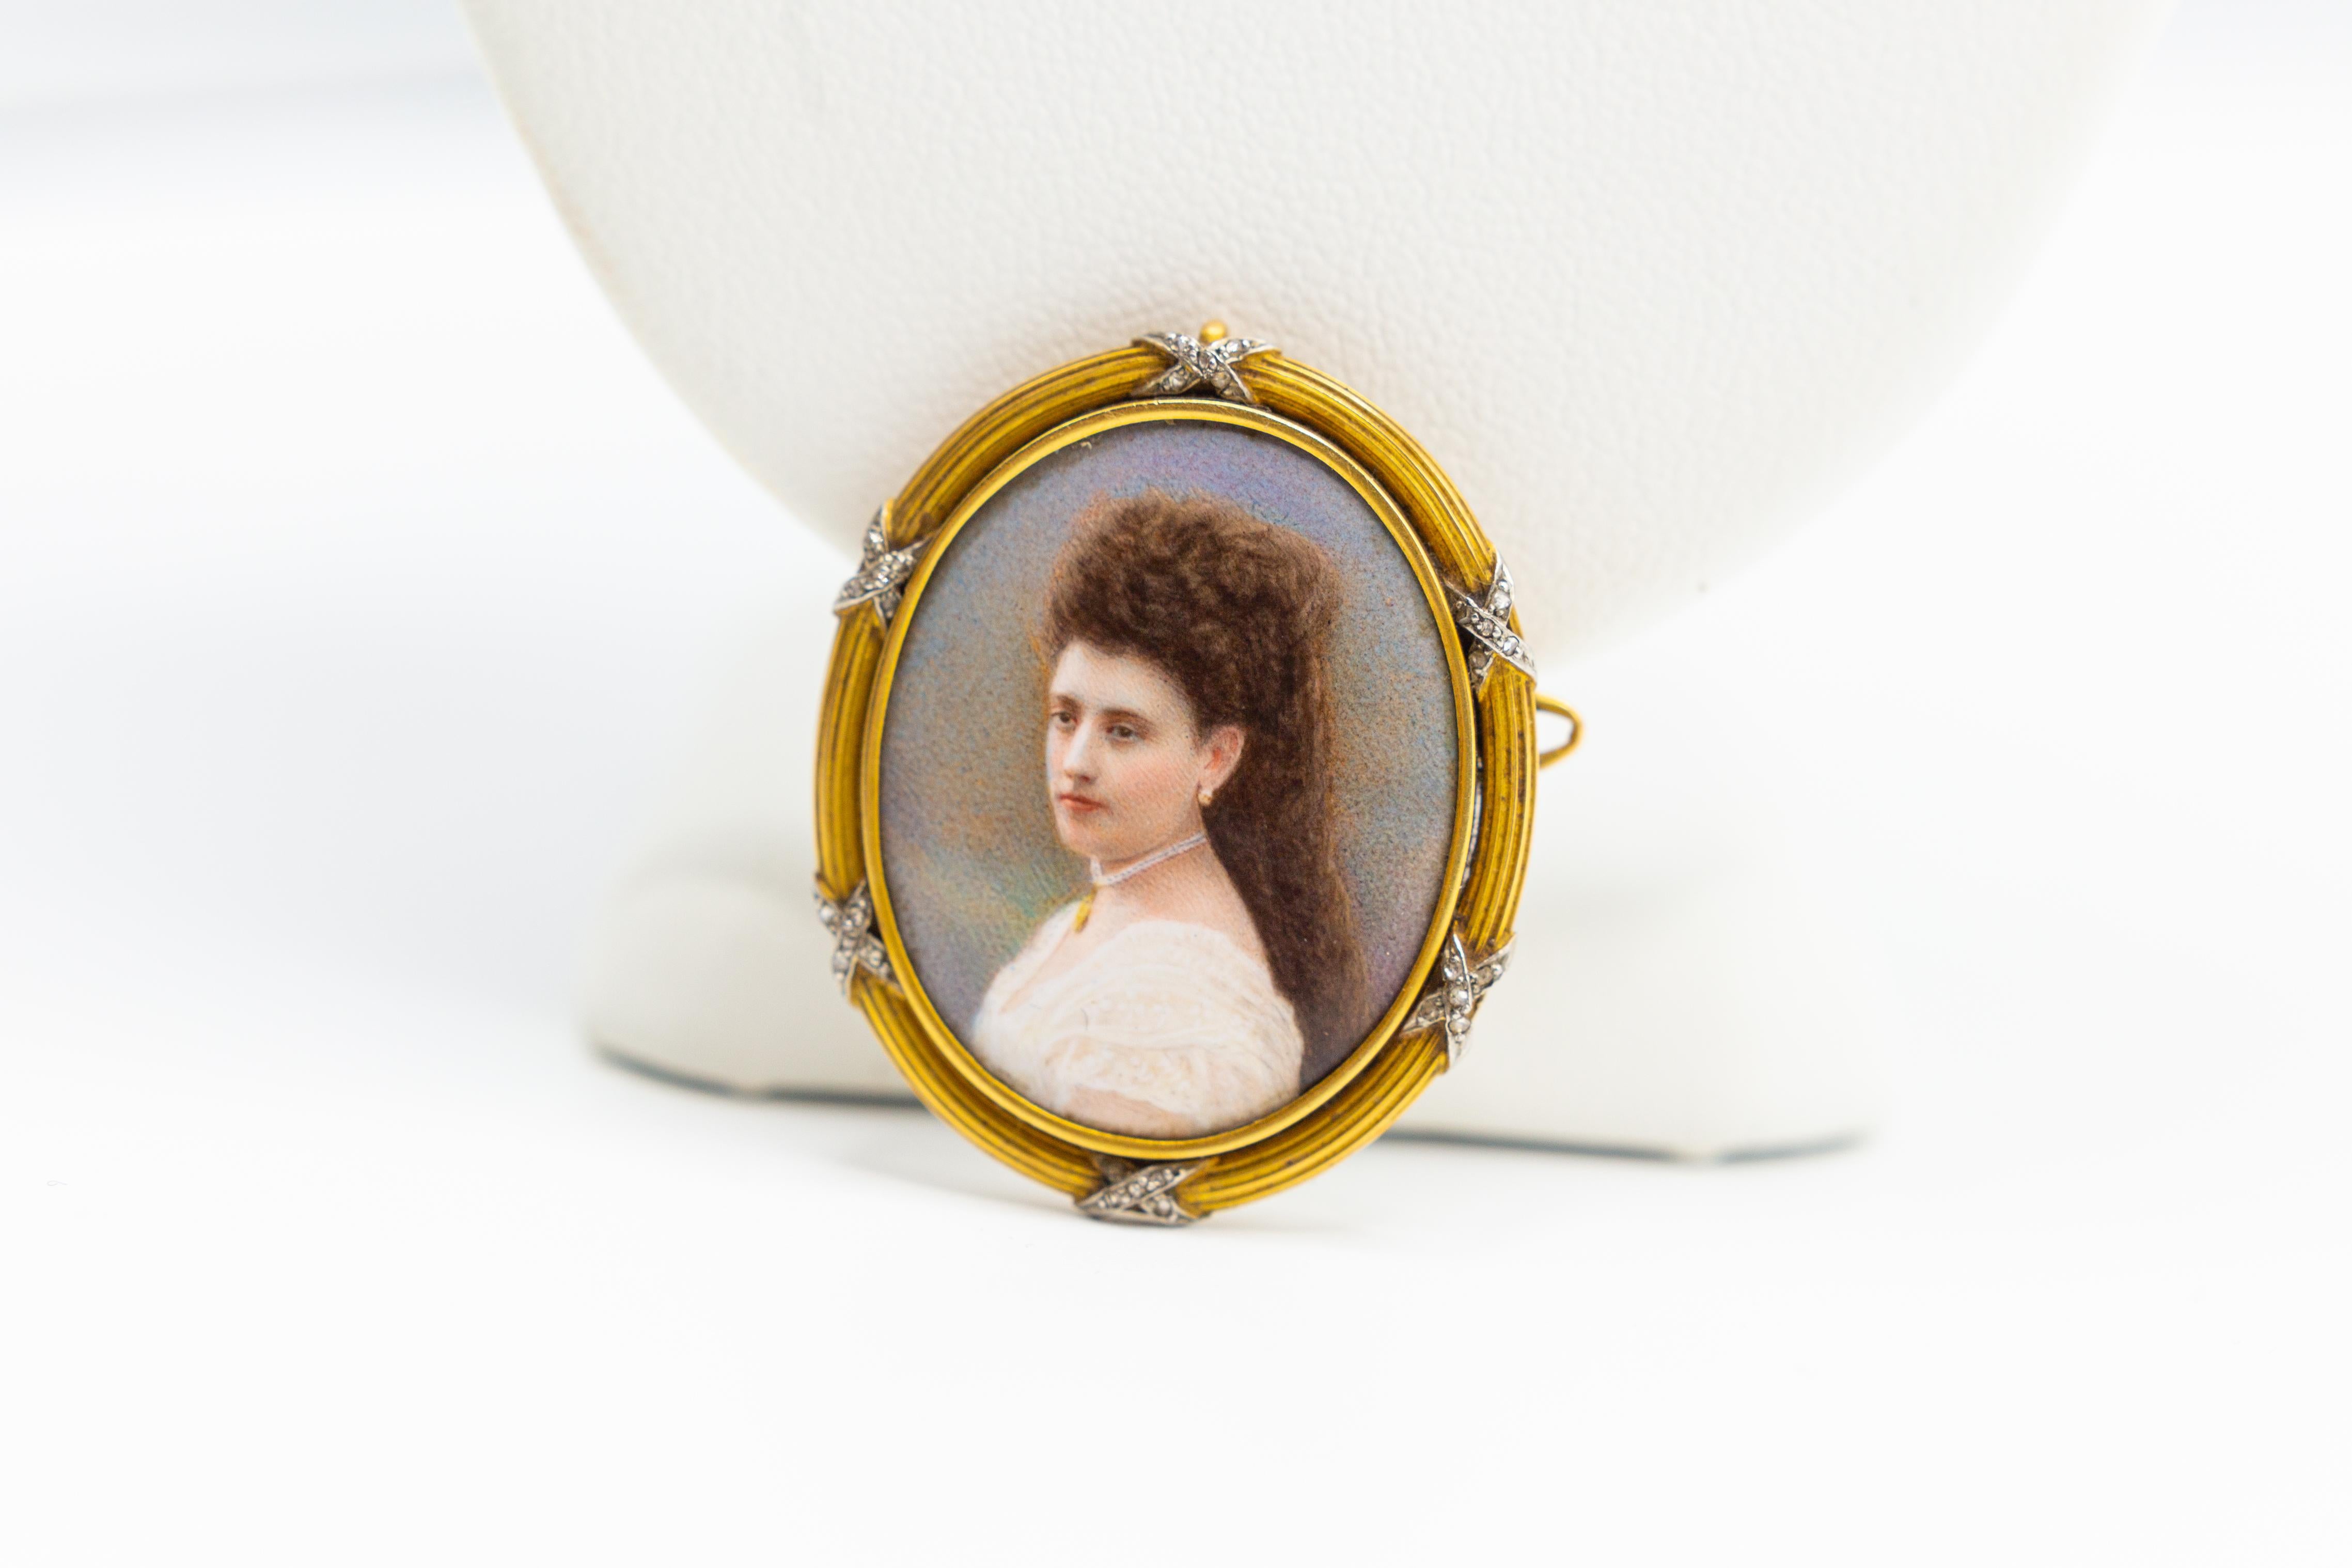 Antique exceptional high-quality miniature portrait painting with jewel frame brooch. This is the finer miniature painting we have seen. For collectors of miniature portraits, this exceptional portrait miniature on the mother of pearl is in